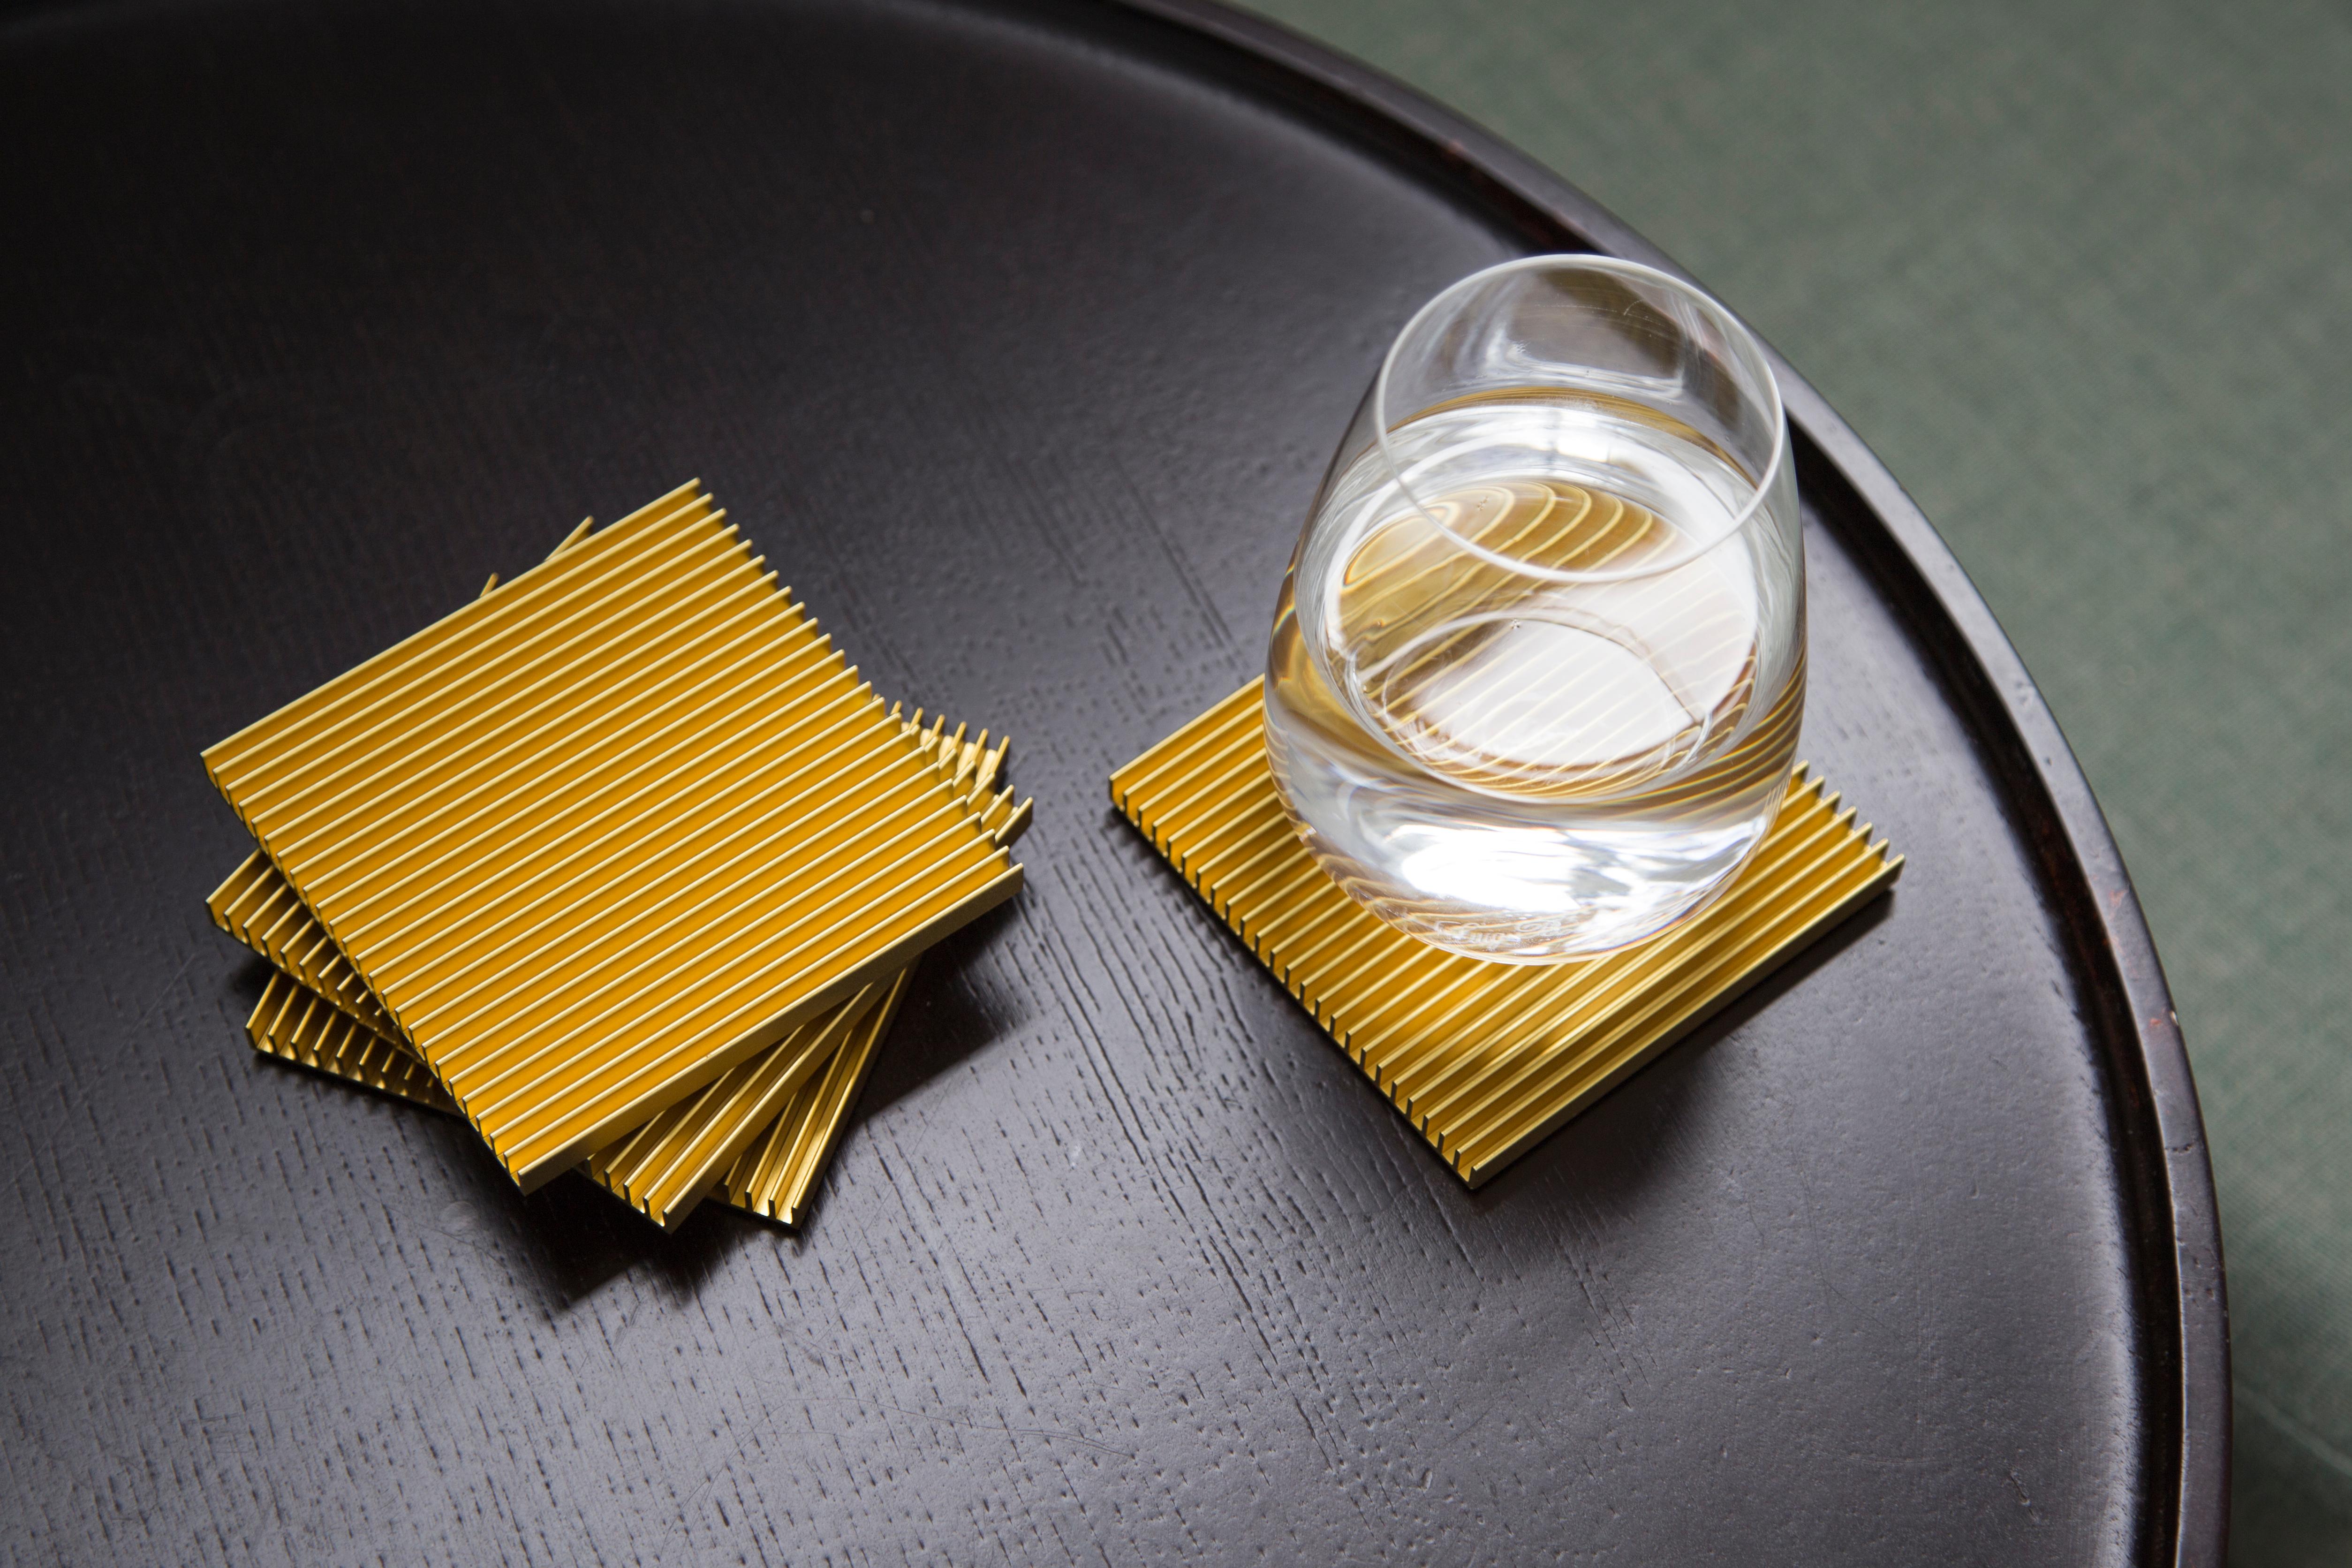 Chinese Sixteen Fin Coasters from Souda, In Stock, Black.